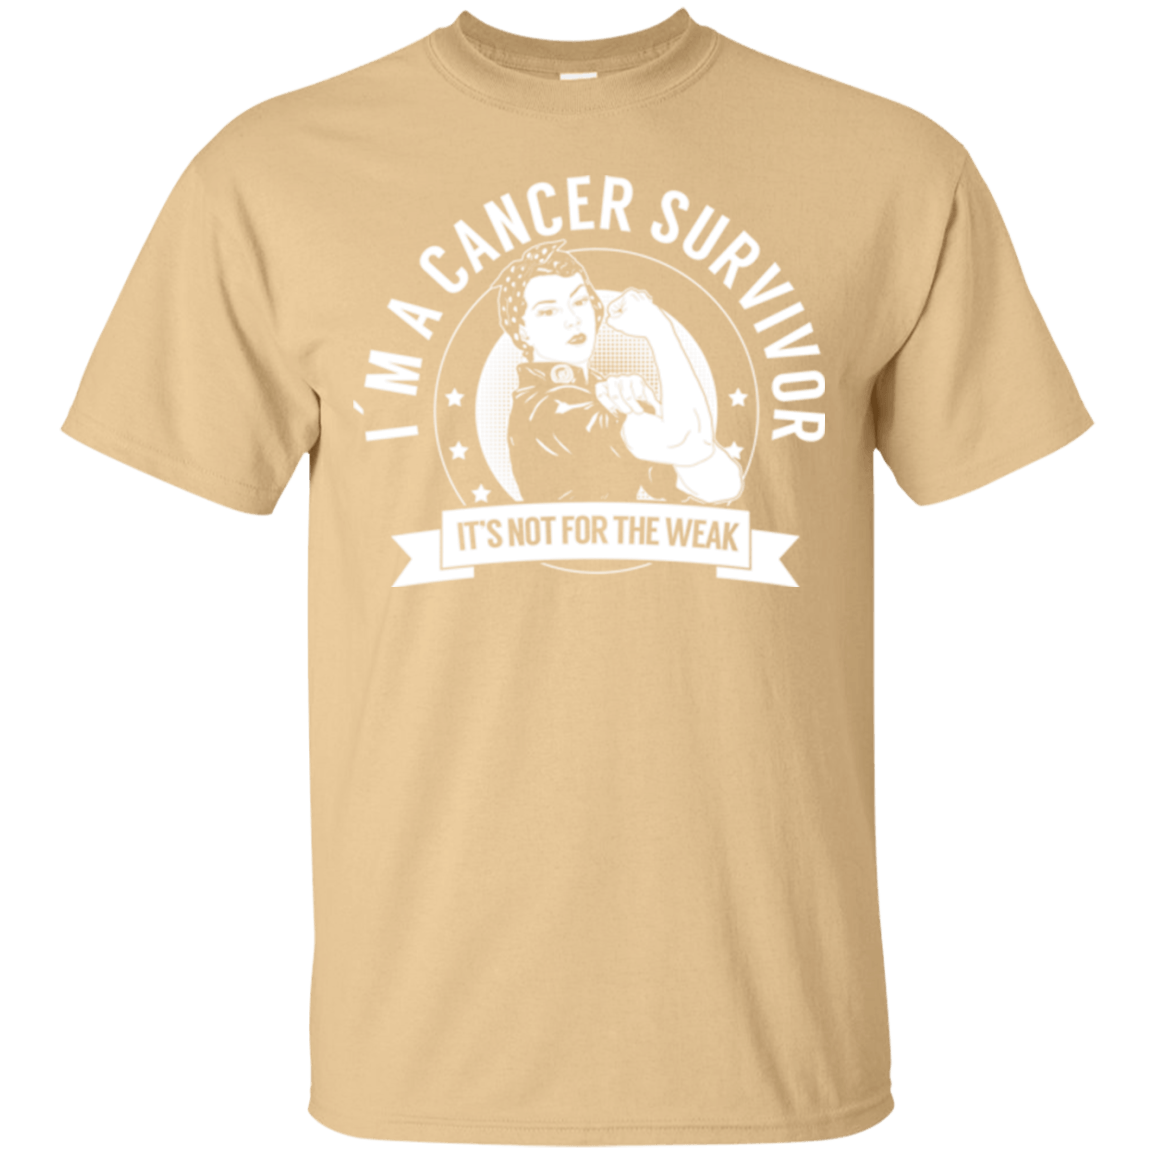 Cancer Survivor Not For The Weak Unisex Shirt - The Unchargeables